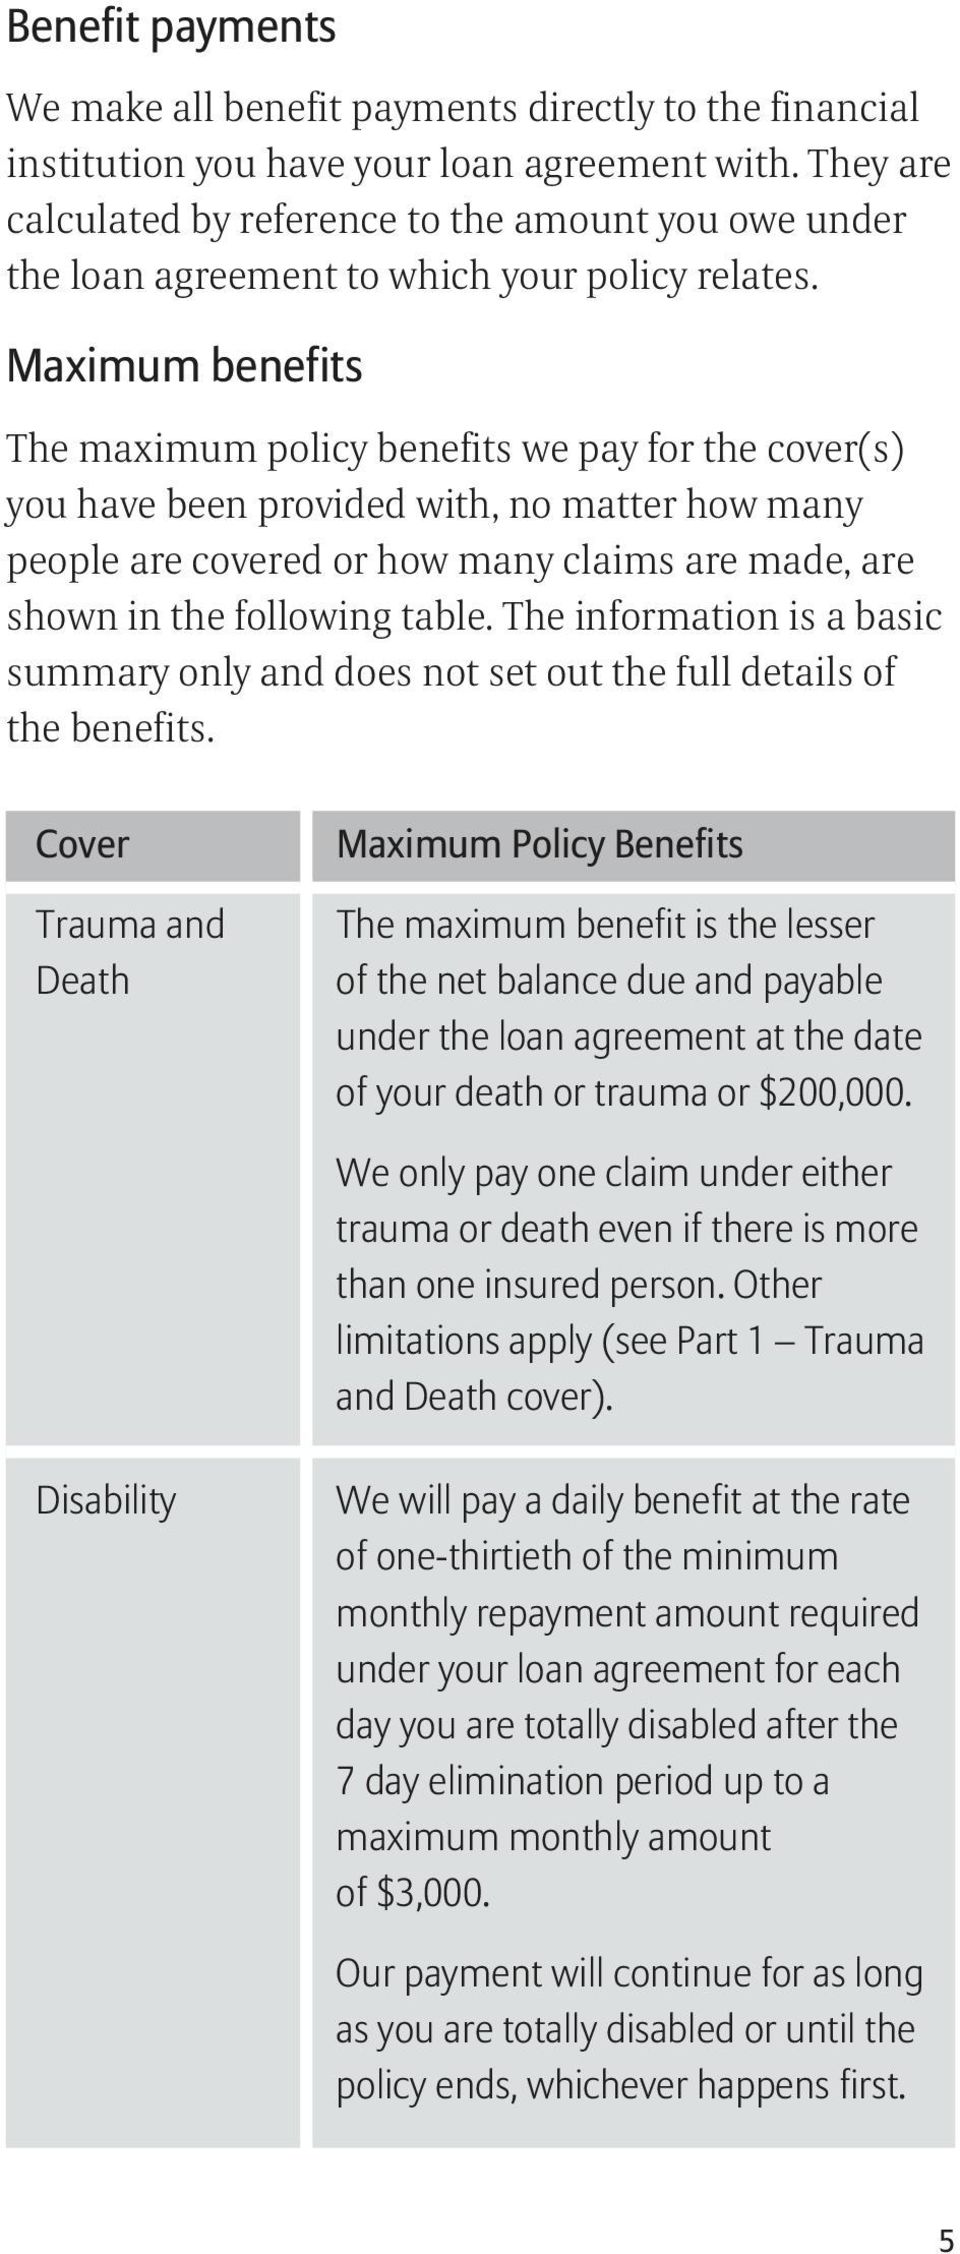 Maximum benefits The maximum policy benefits we pay for the cover(s) you have been provided with, no matter how many people are covered or how many claims are made, are shown in the following table.